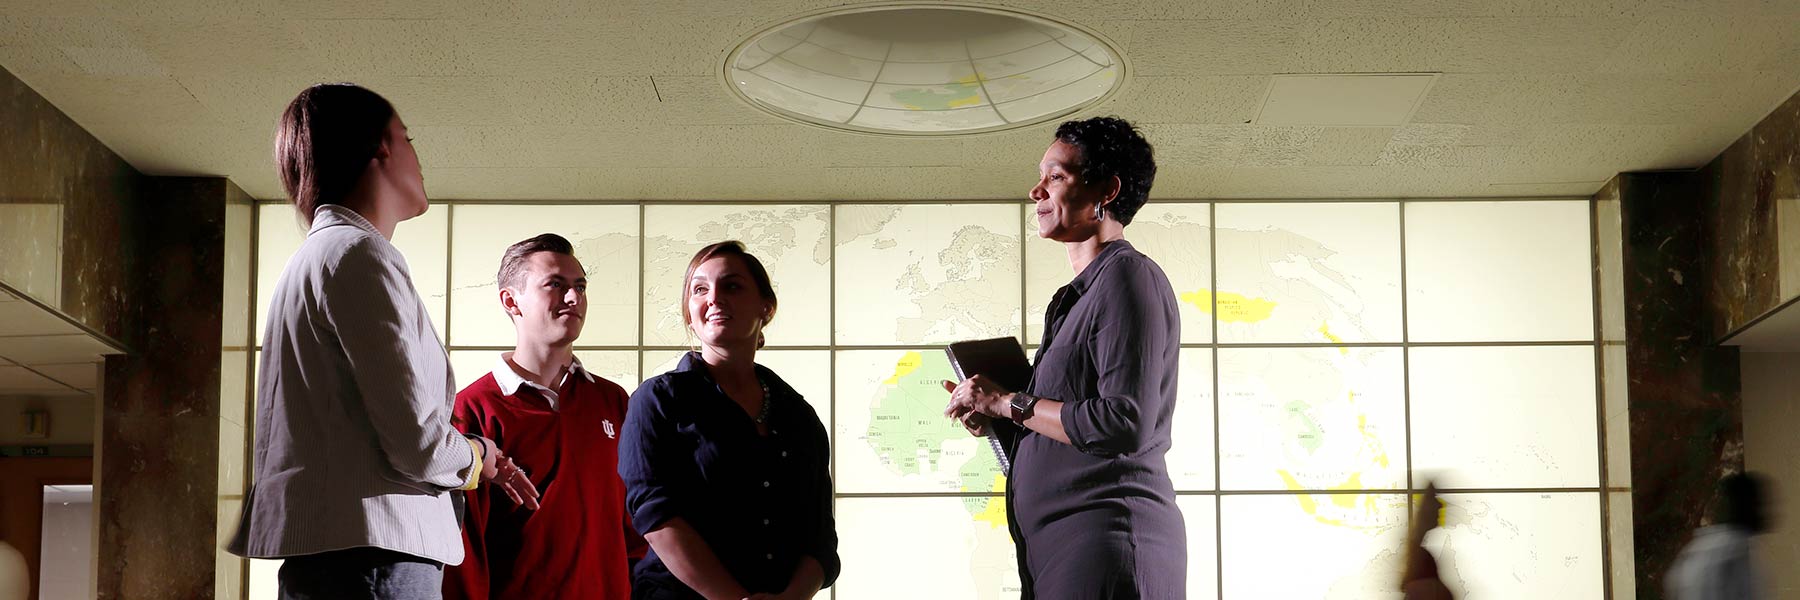 Three students talk with a professor in front of a lighted wall showing a world map.